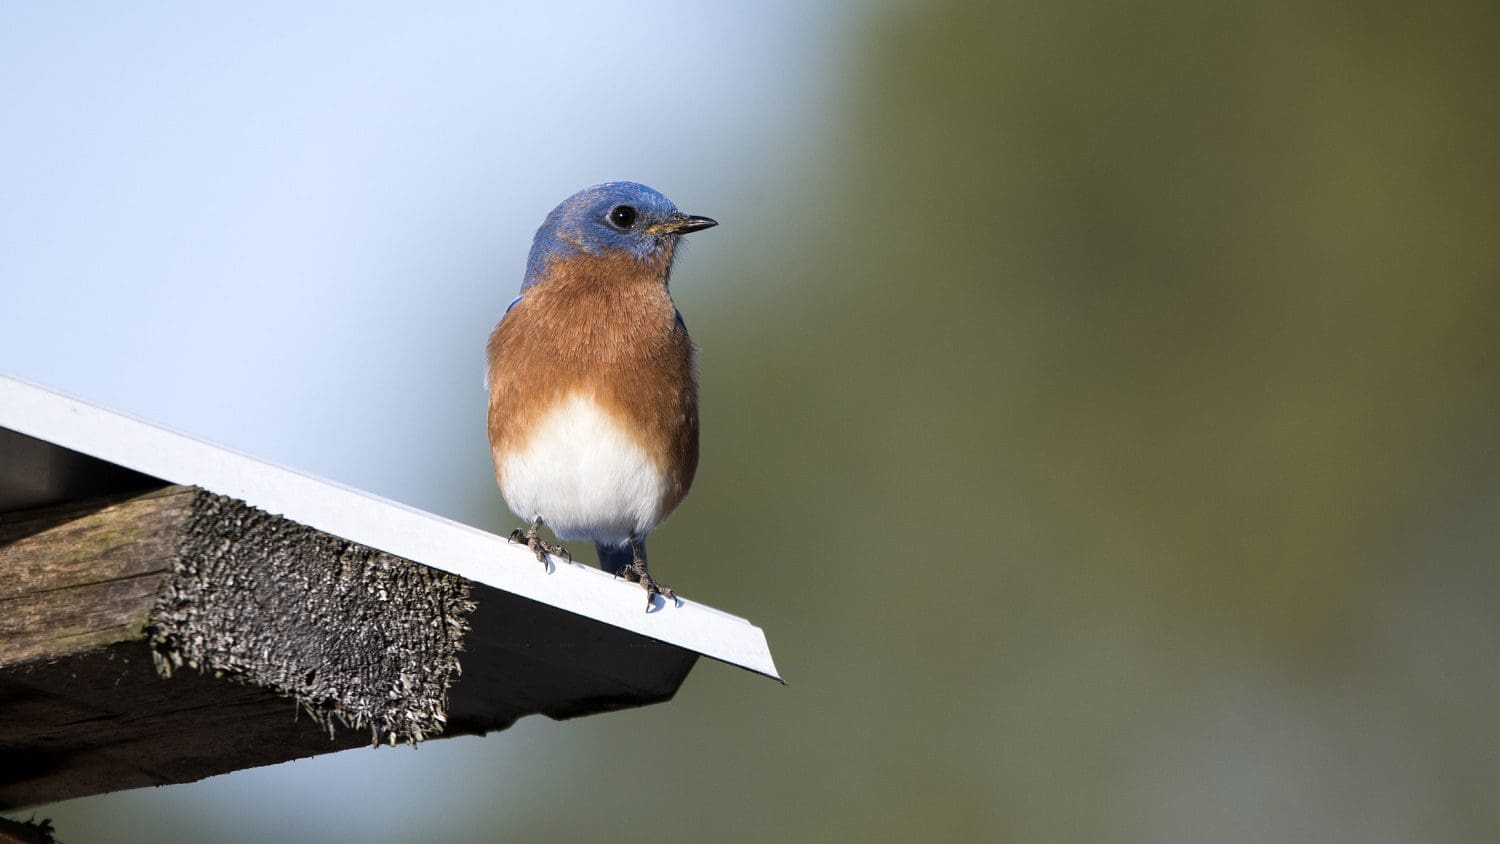 Eastern bluebird on a tin roof: Photo 169535181 © William Wise | Dreamstime.com